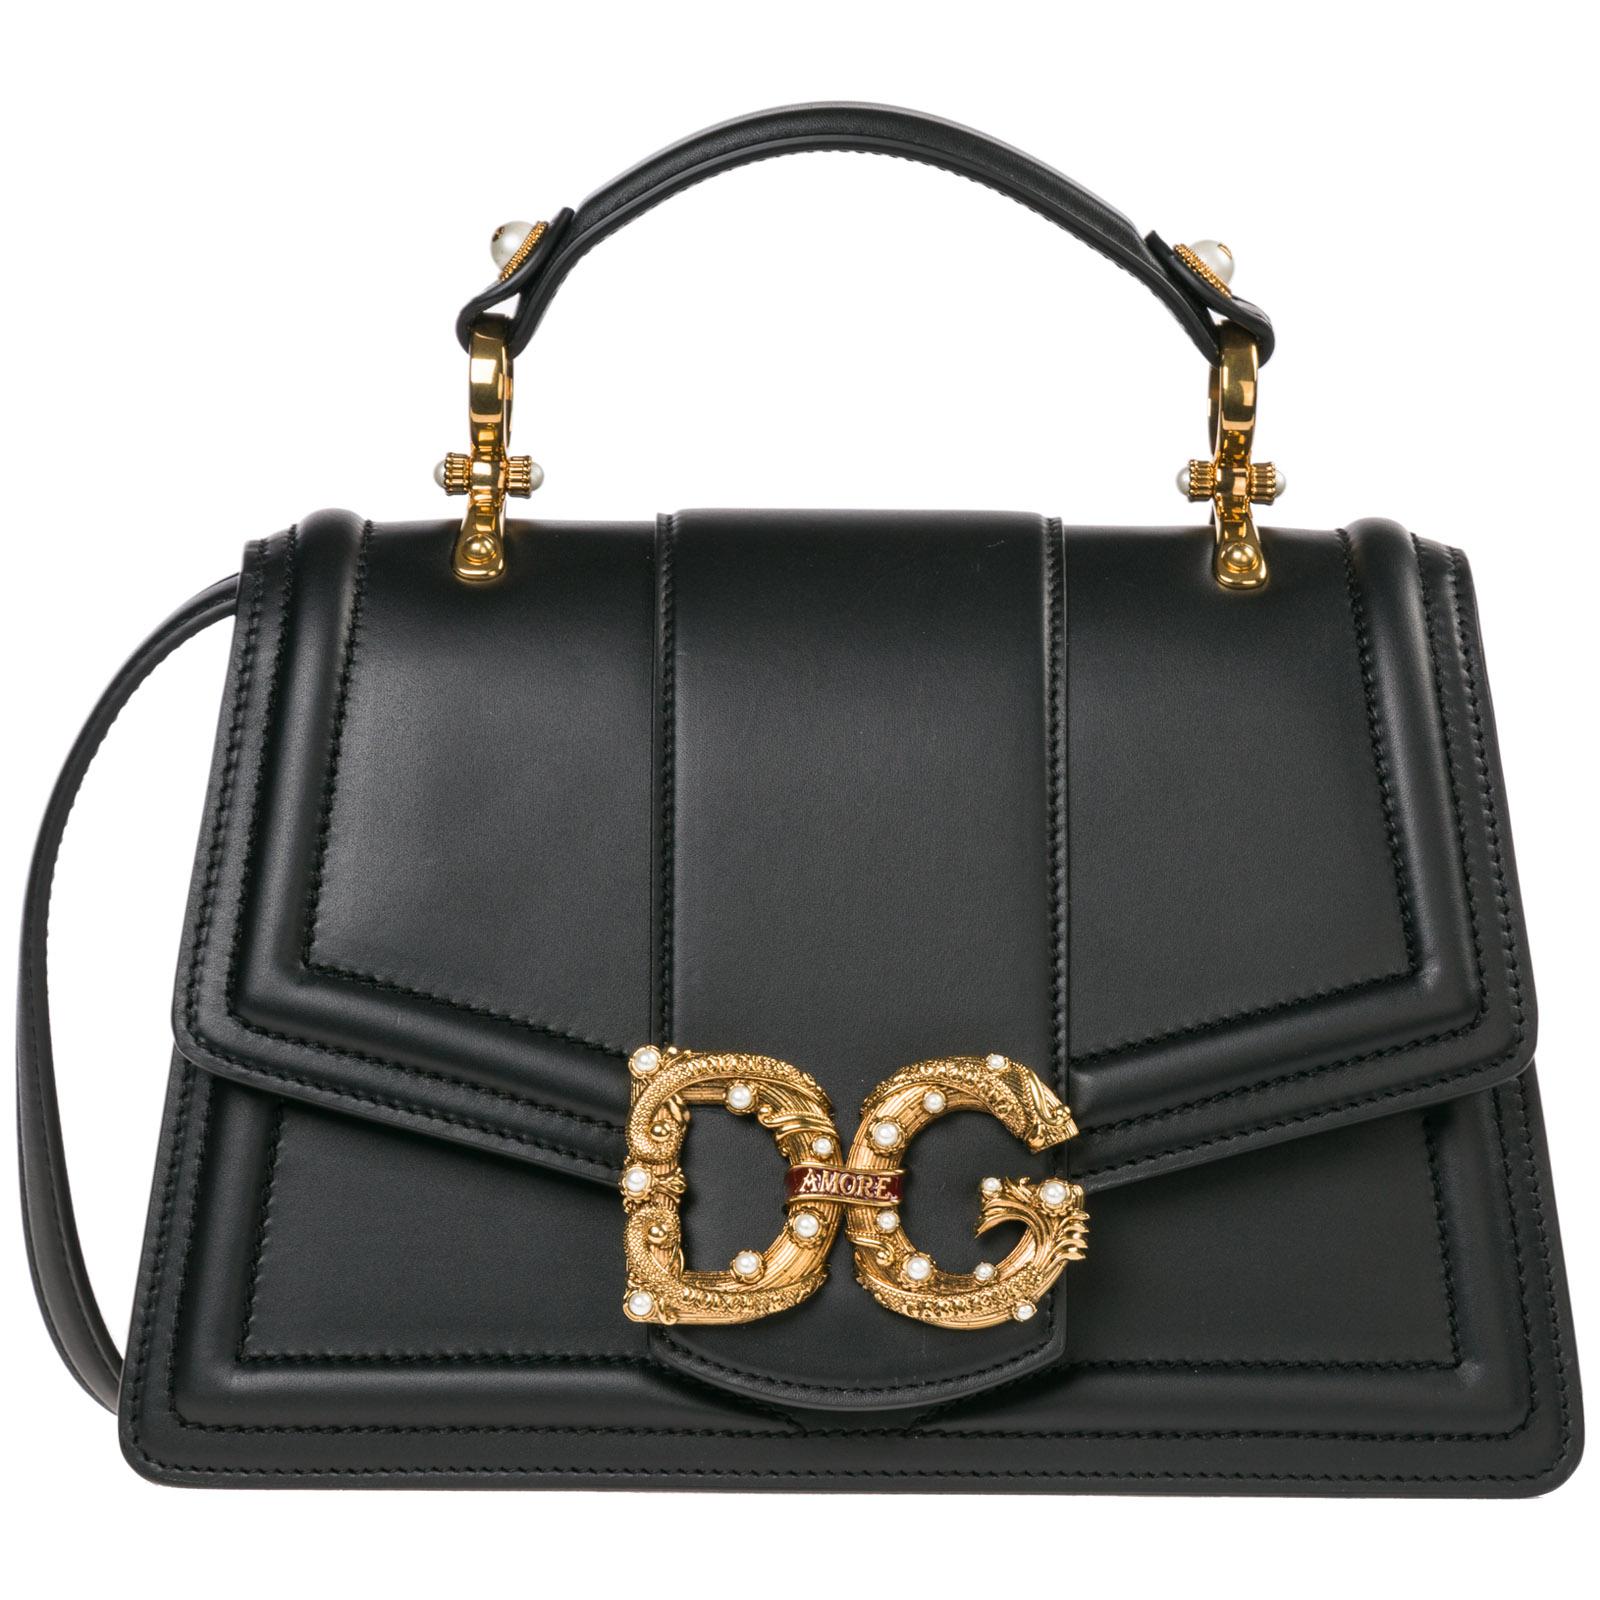 Lyst Dolce And Gabbana Leather Handbag Shopping Bag Purse Dg Amore In Black